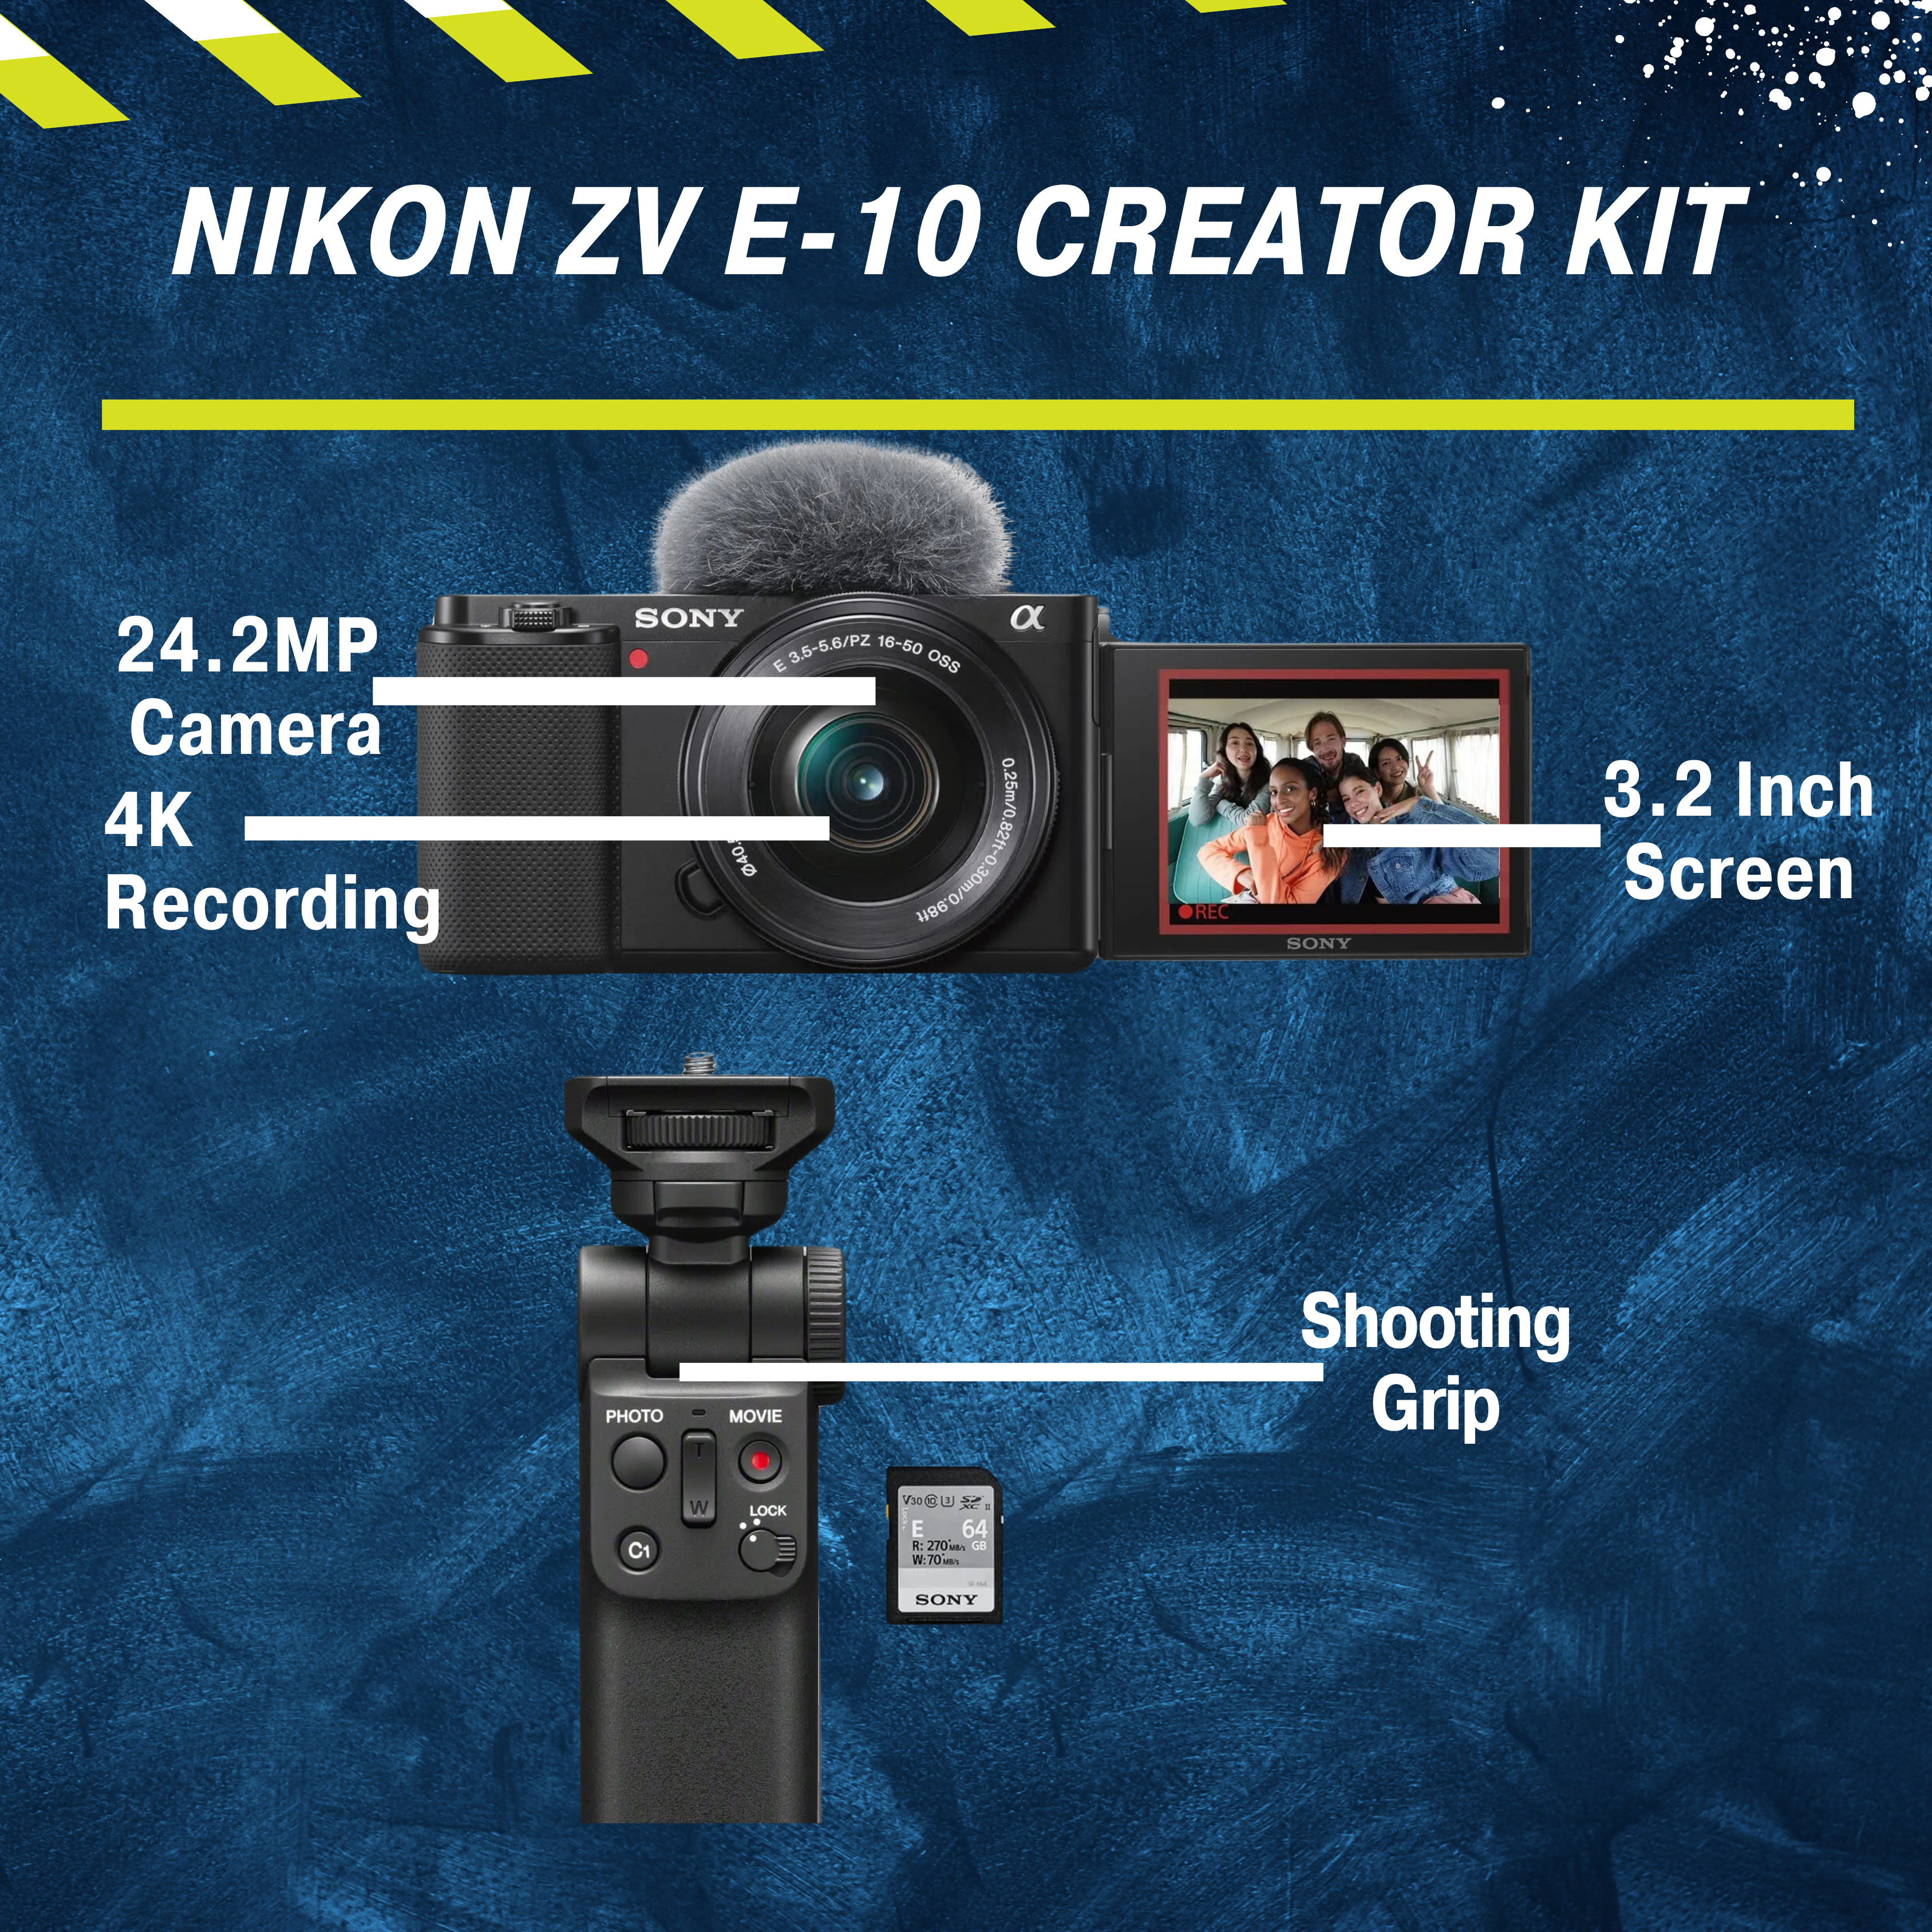 These are product images of Sony ZVE10 Vlogging Camera Creator Kit on rent by SharePal.